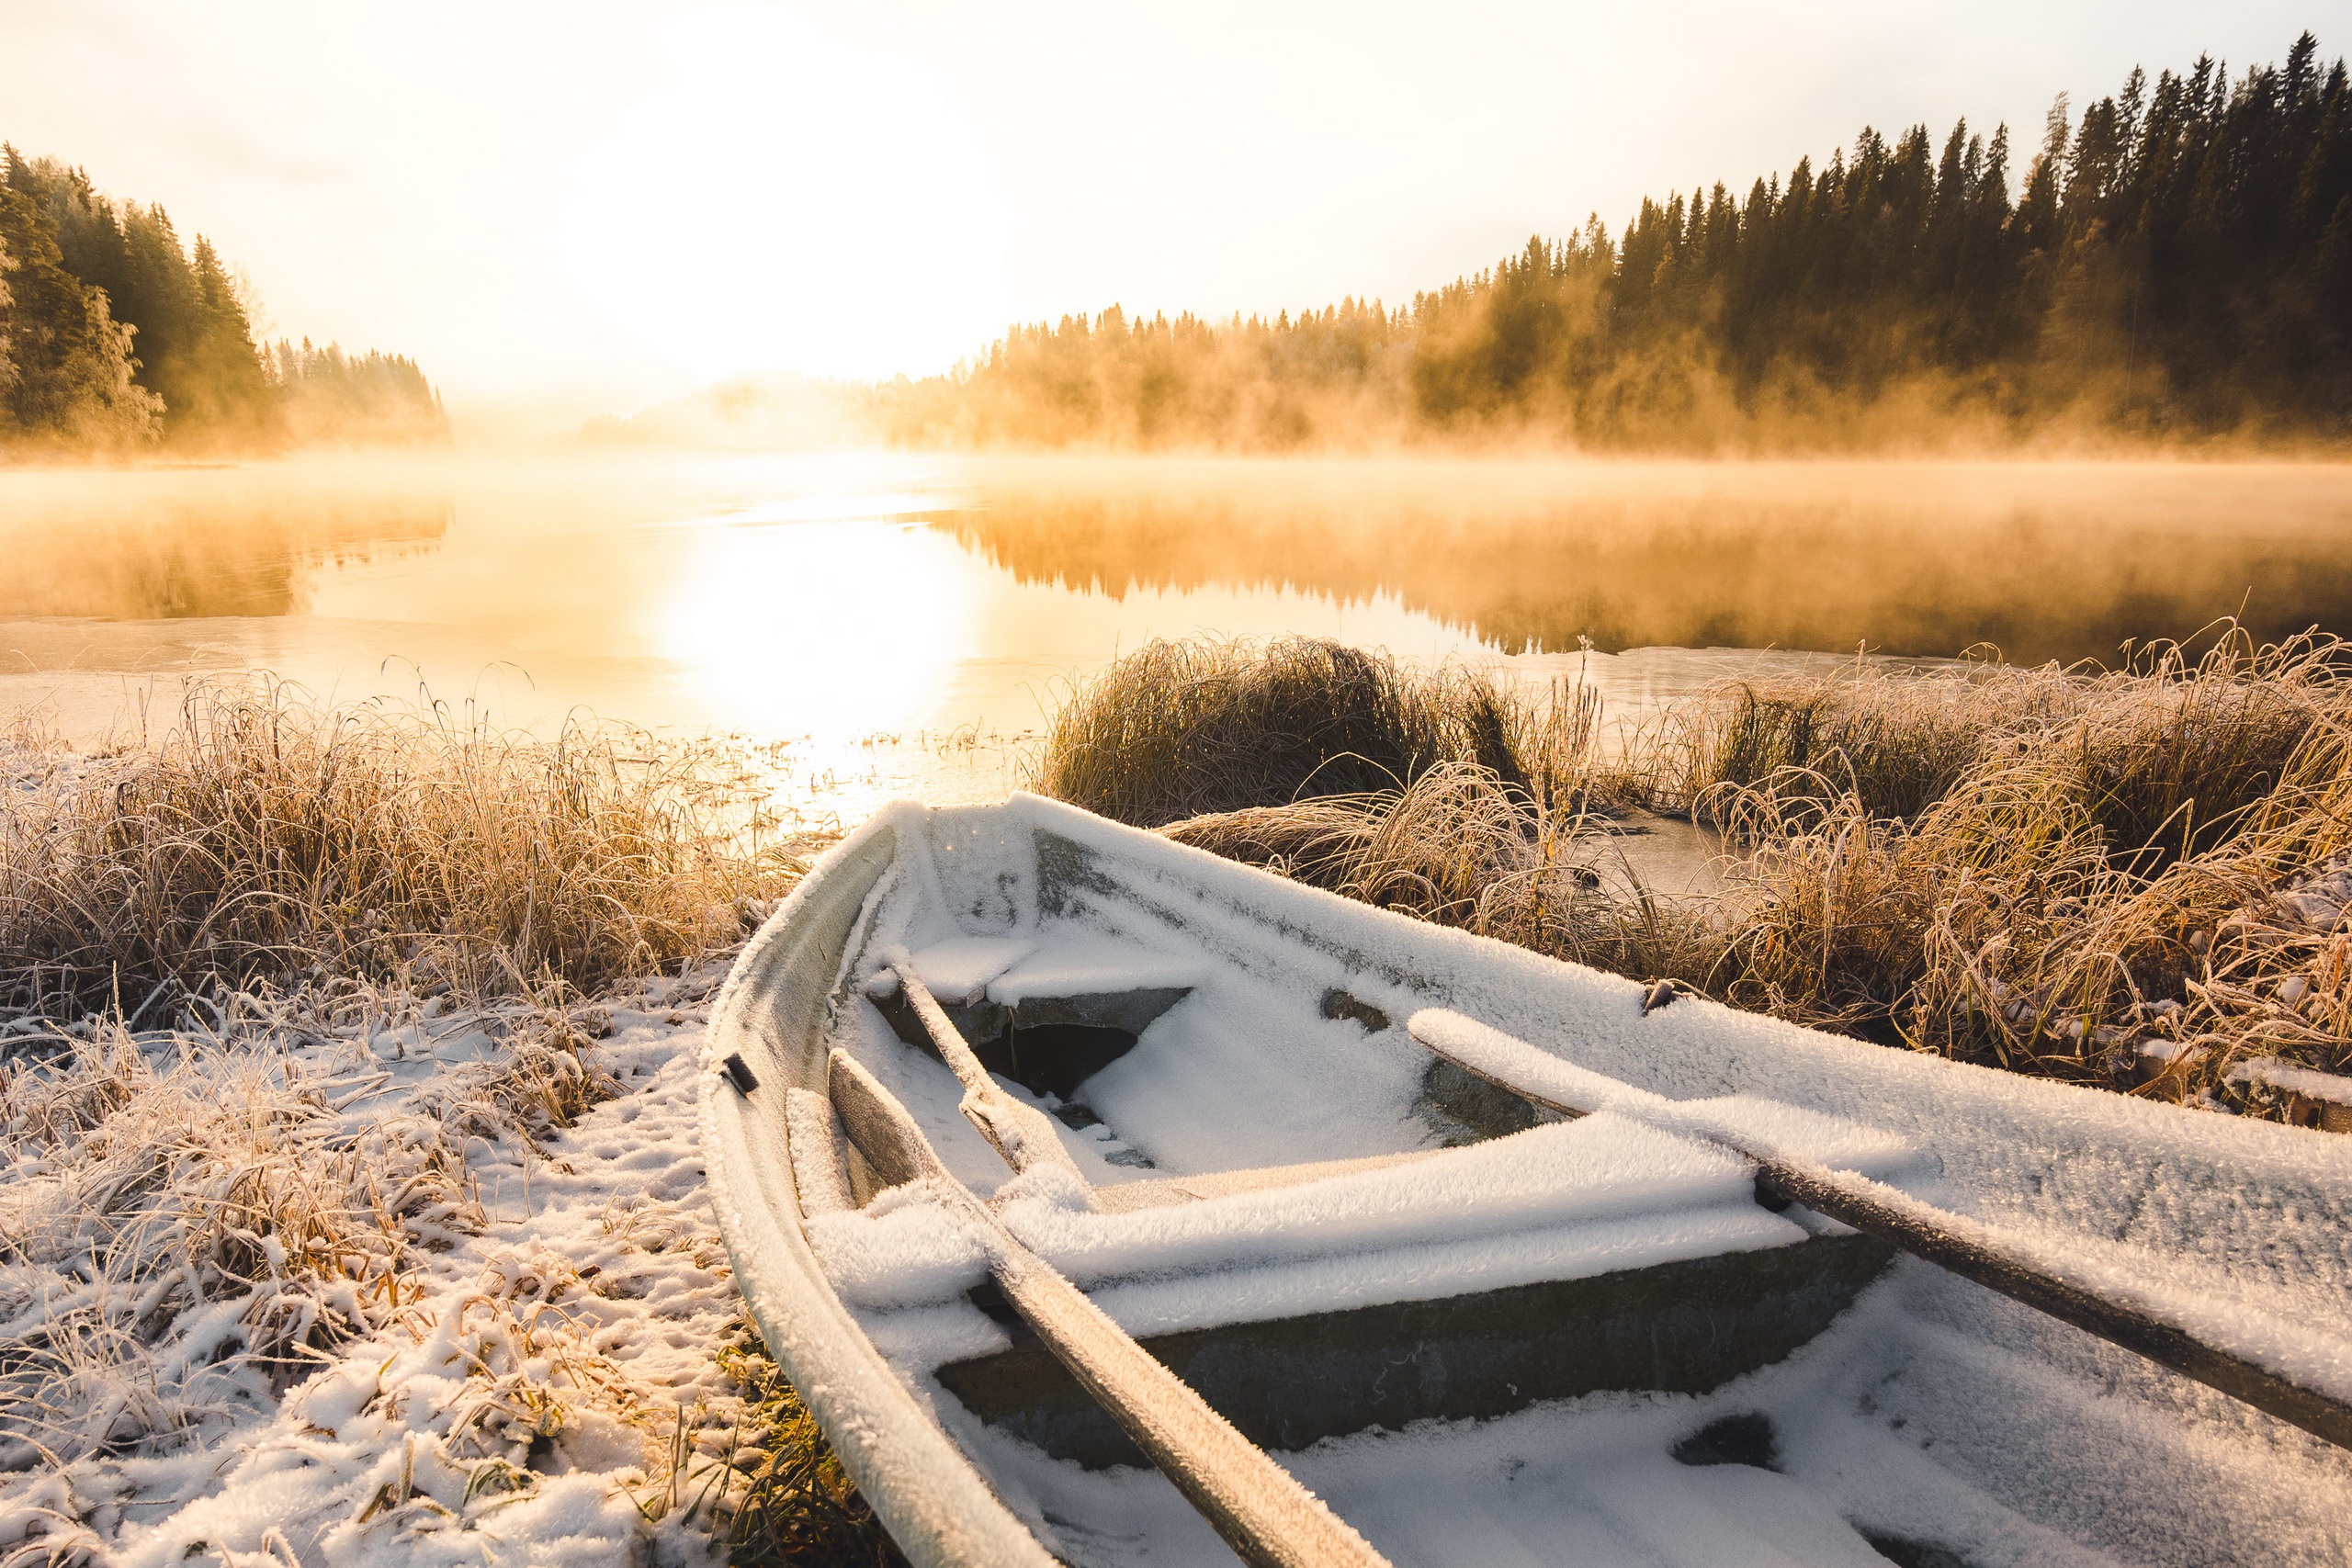 General 2560x1707 boat vehicle sunlight nature snow winter